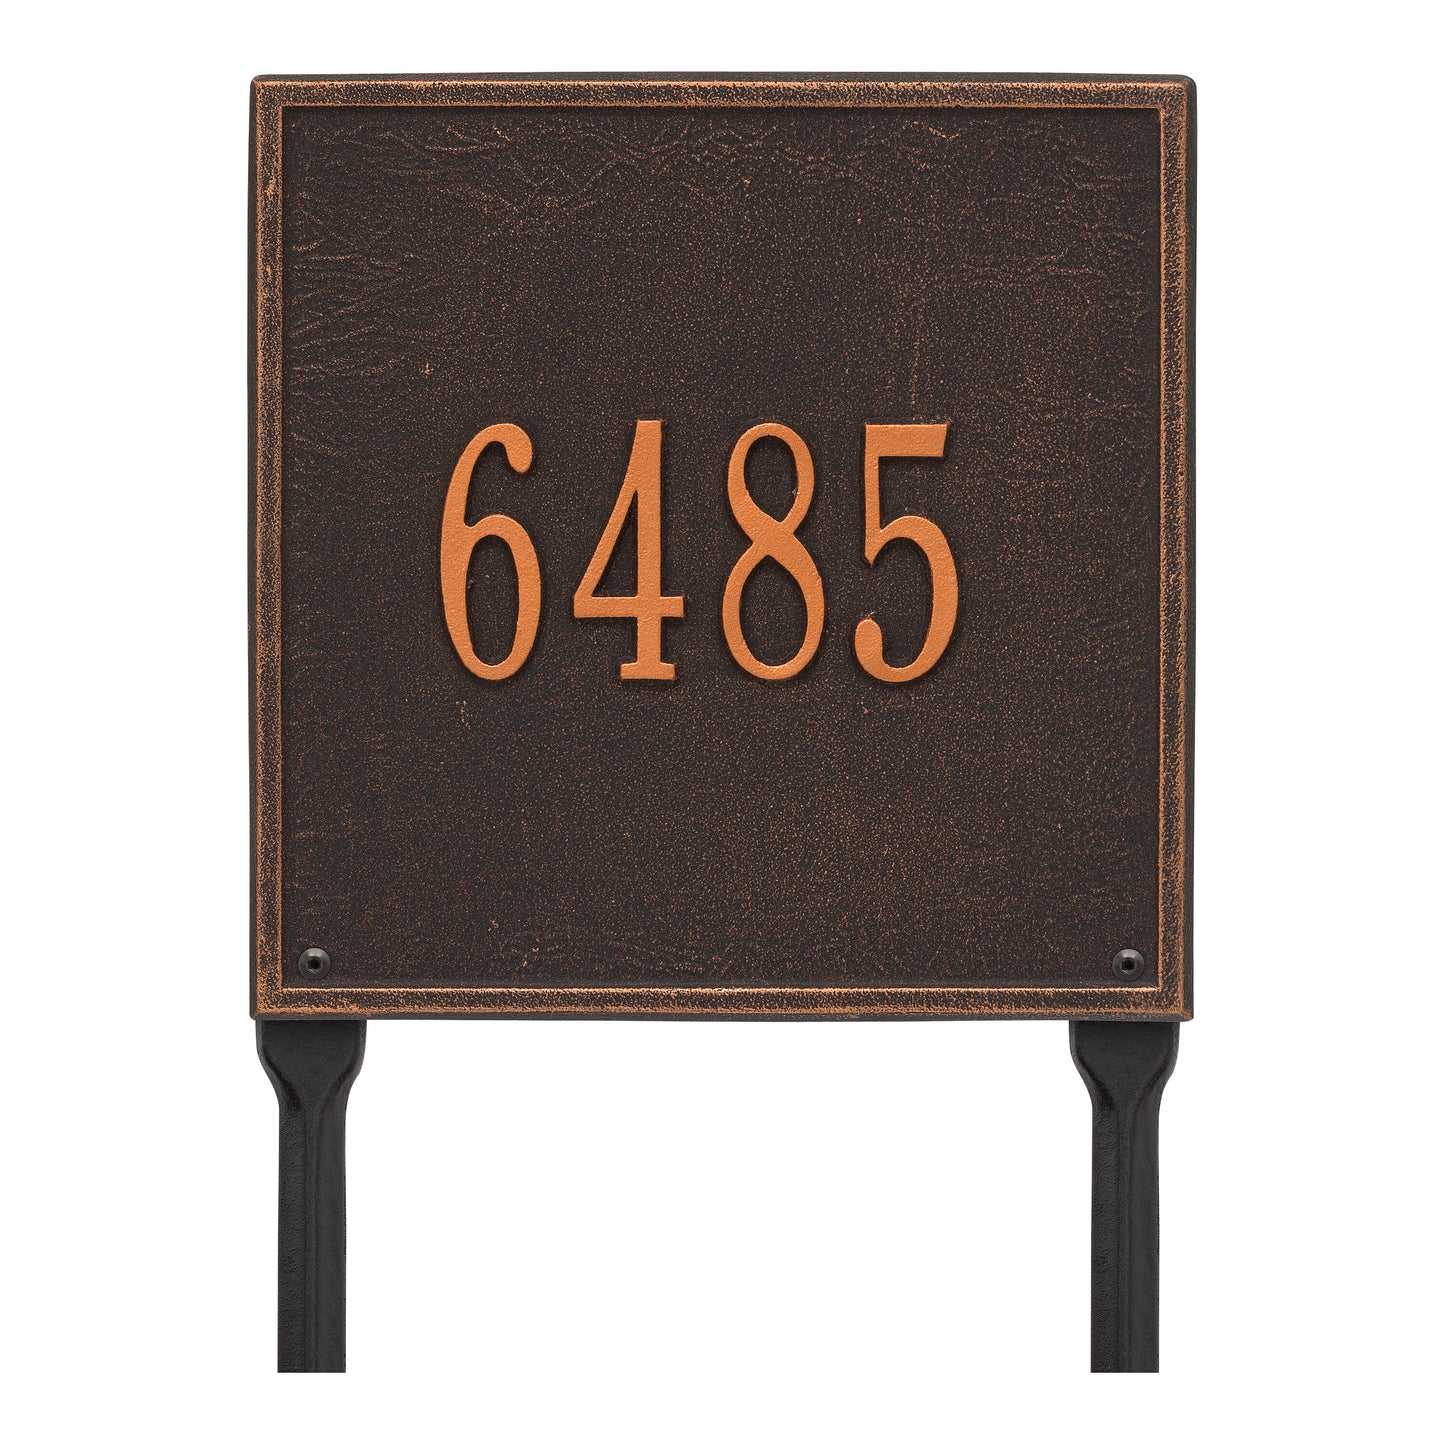 Whitehall Products Personalized Square Standard Lawn Plaque One Line Bronze/gold